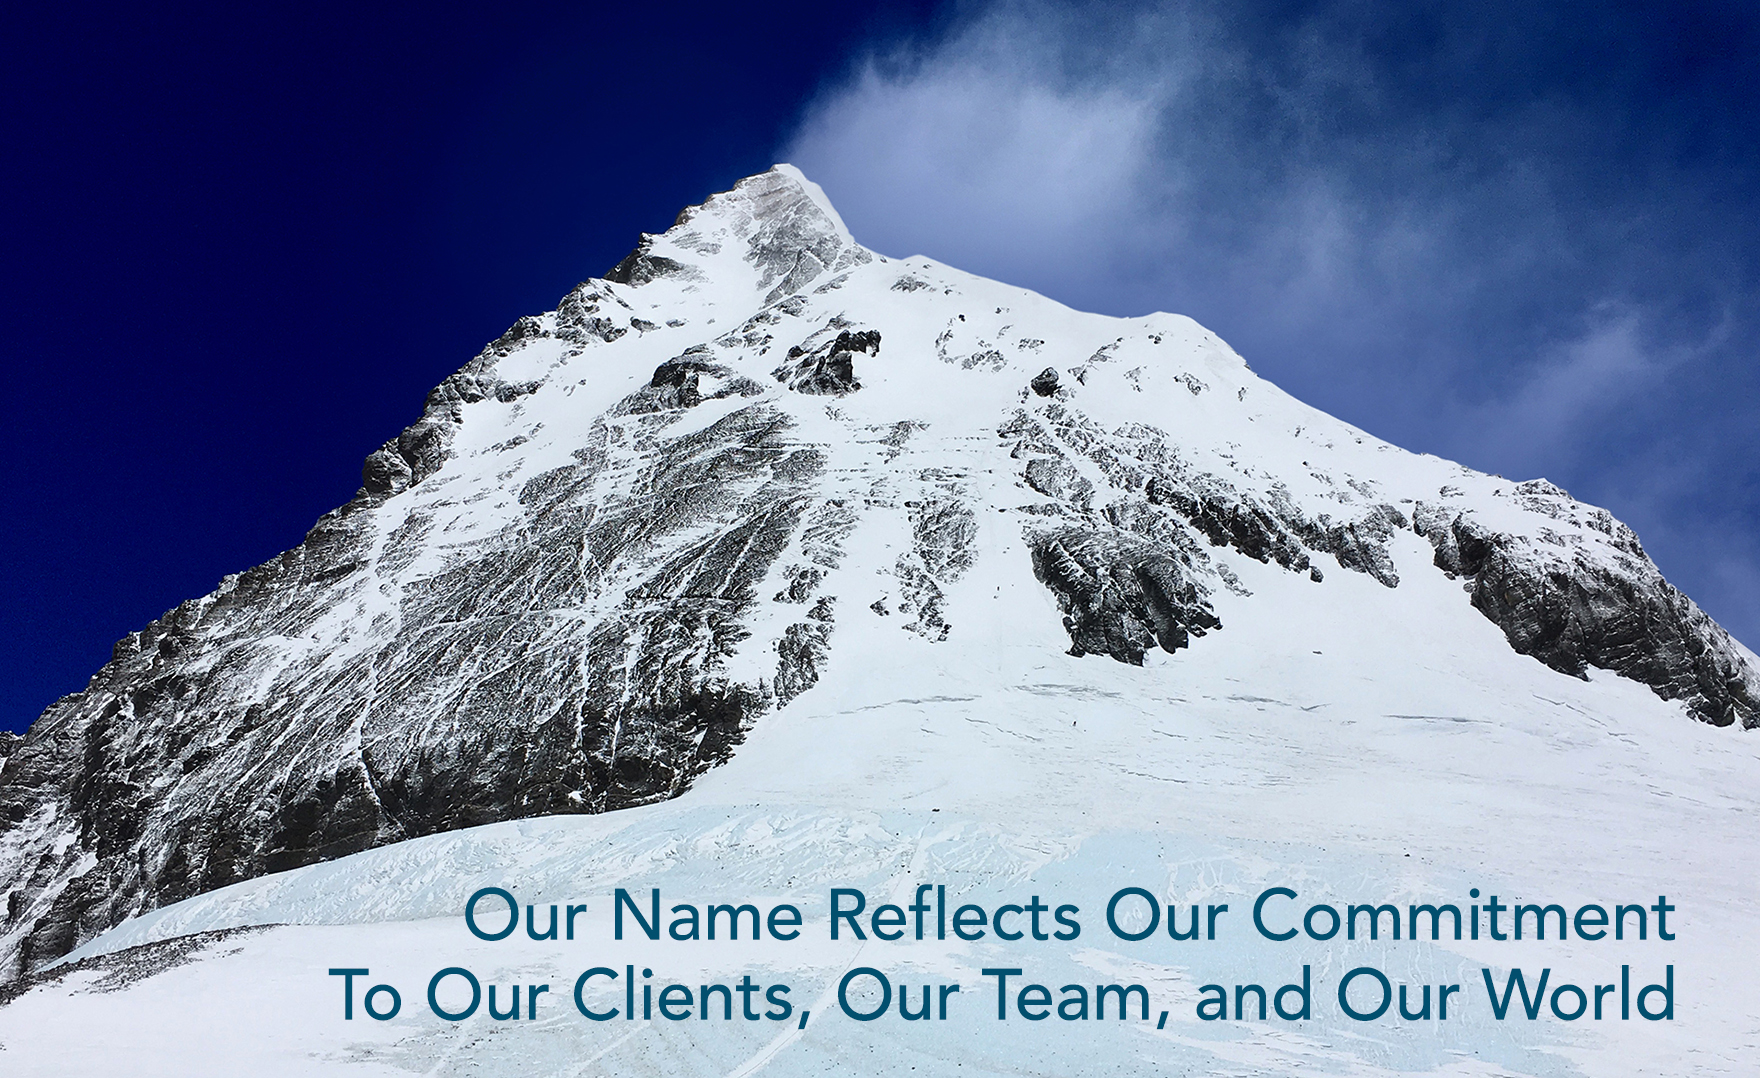 Our Name Reflects Our Commitment To Our Clients, Our Team, and Our World